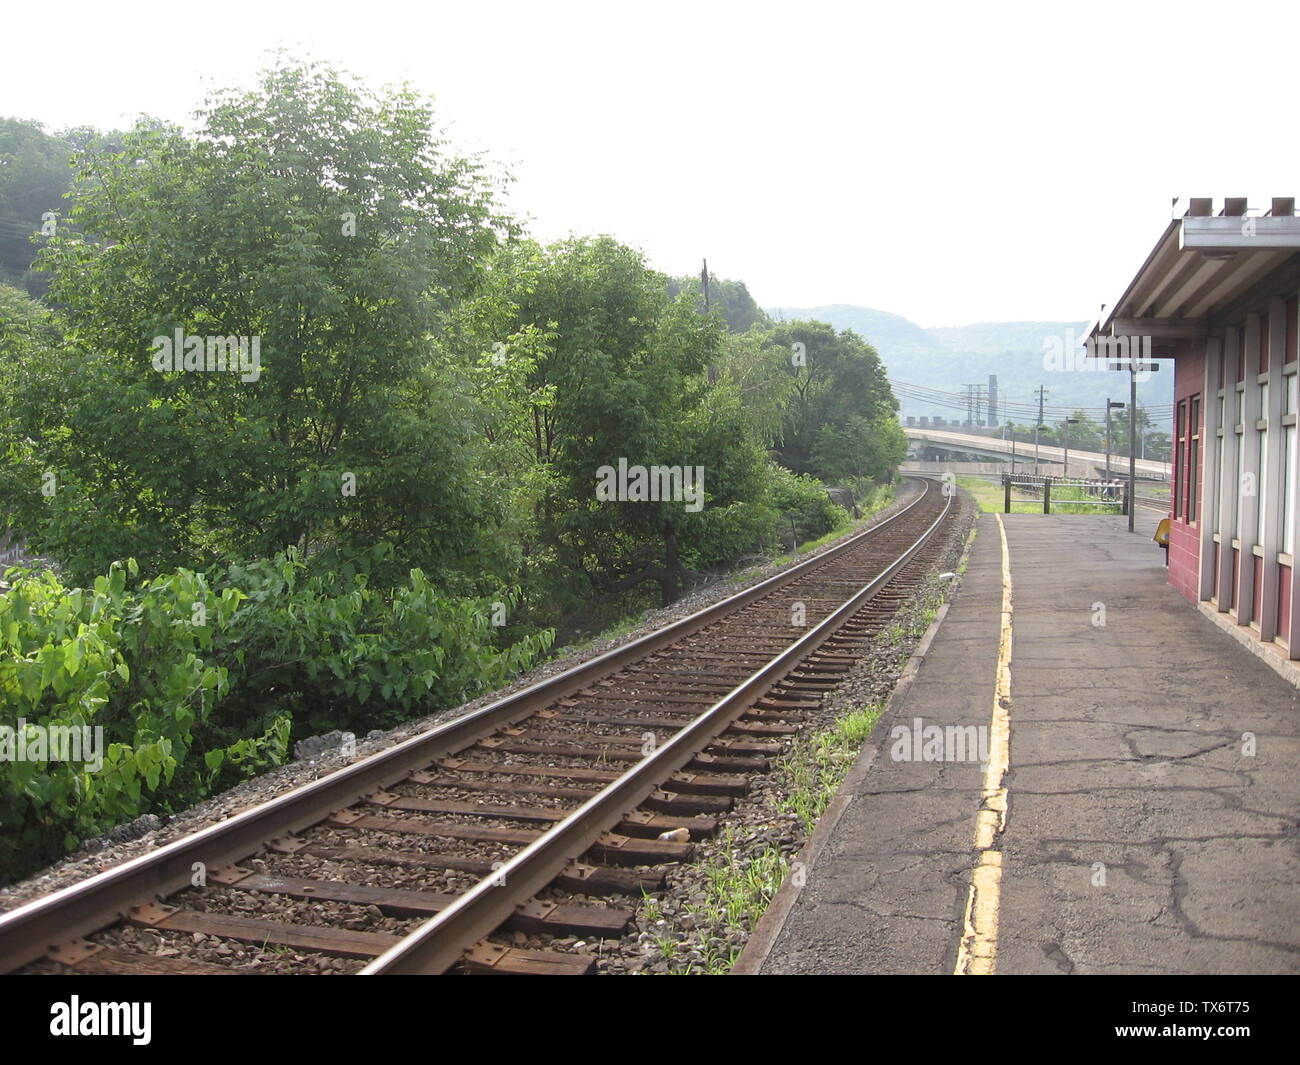 This is a photo of the station platform in Johnstown, PA. Photo taken 30 June 2006.; 7 July 2006 (original upload date); Transferred from en.pedia to Commons by Liftarn using CommonsHelper.; Jeffreyvos at English pedia; Stock Photo